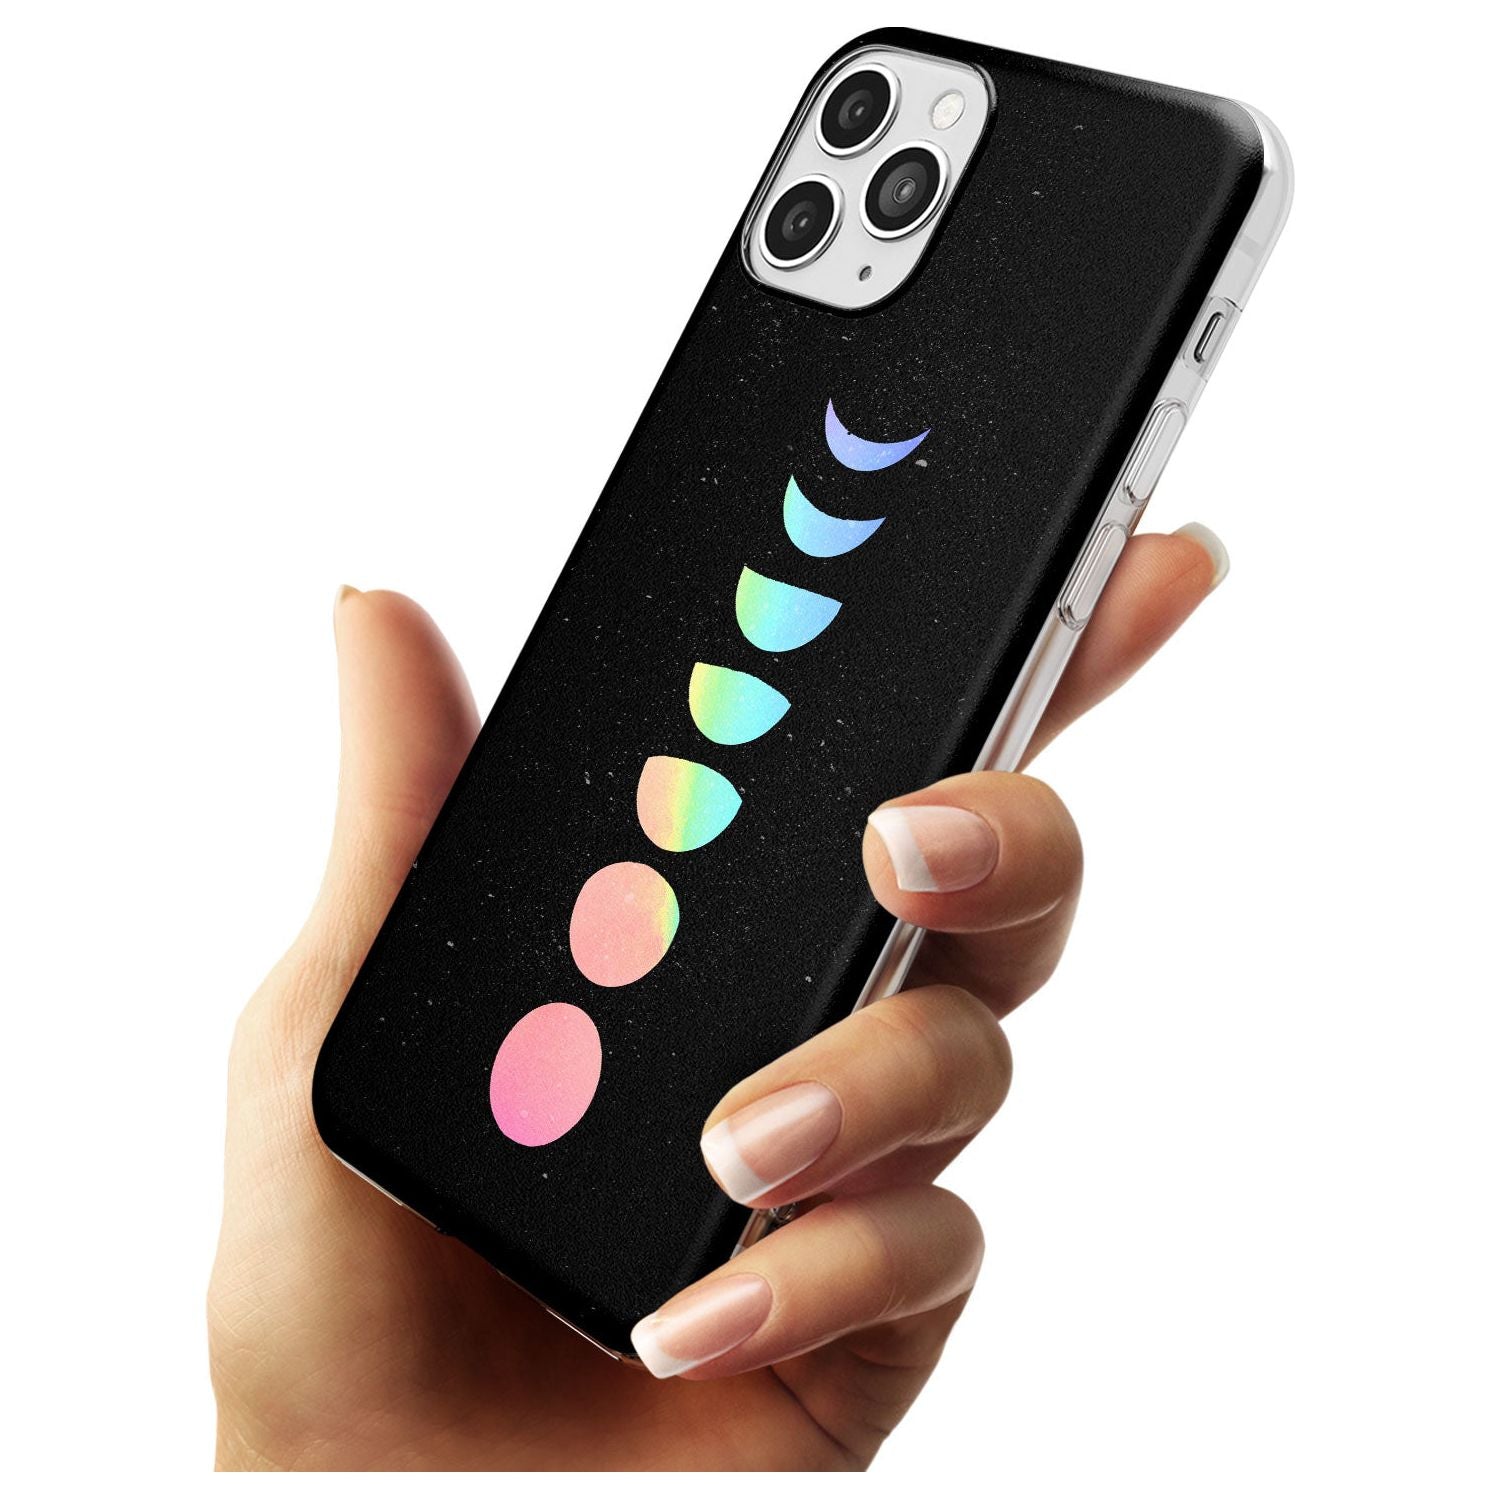 Pastel Moon Phases Black Impact Phone Case for iPhone 11 Pro Max